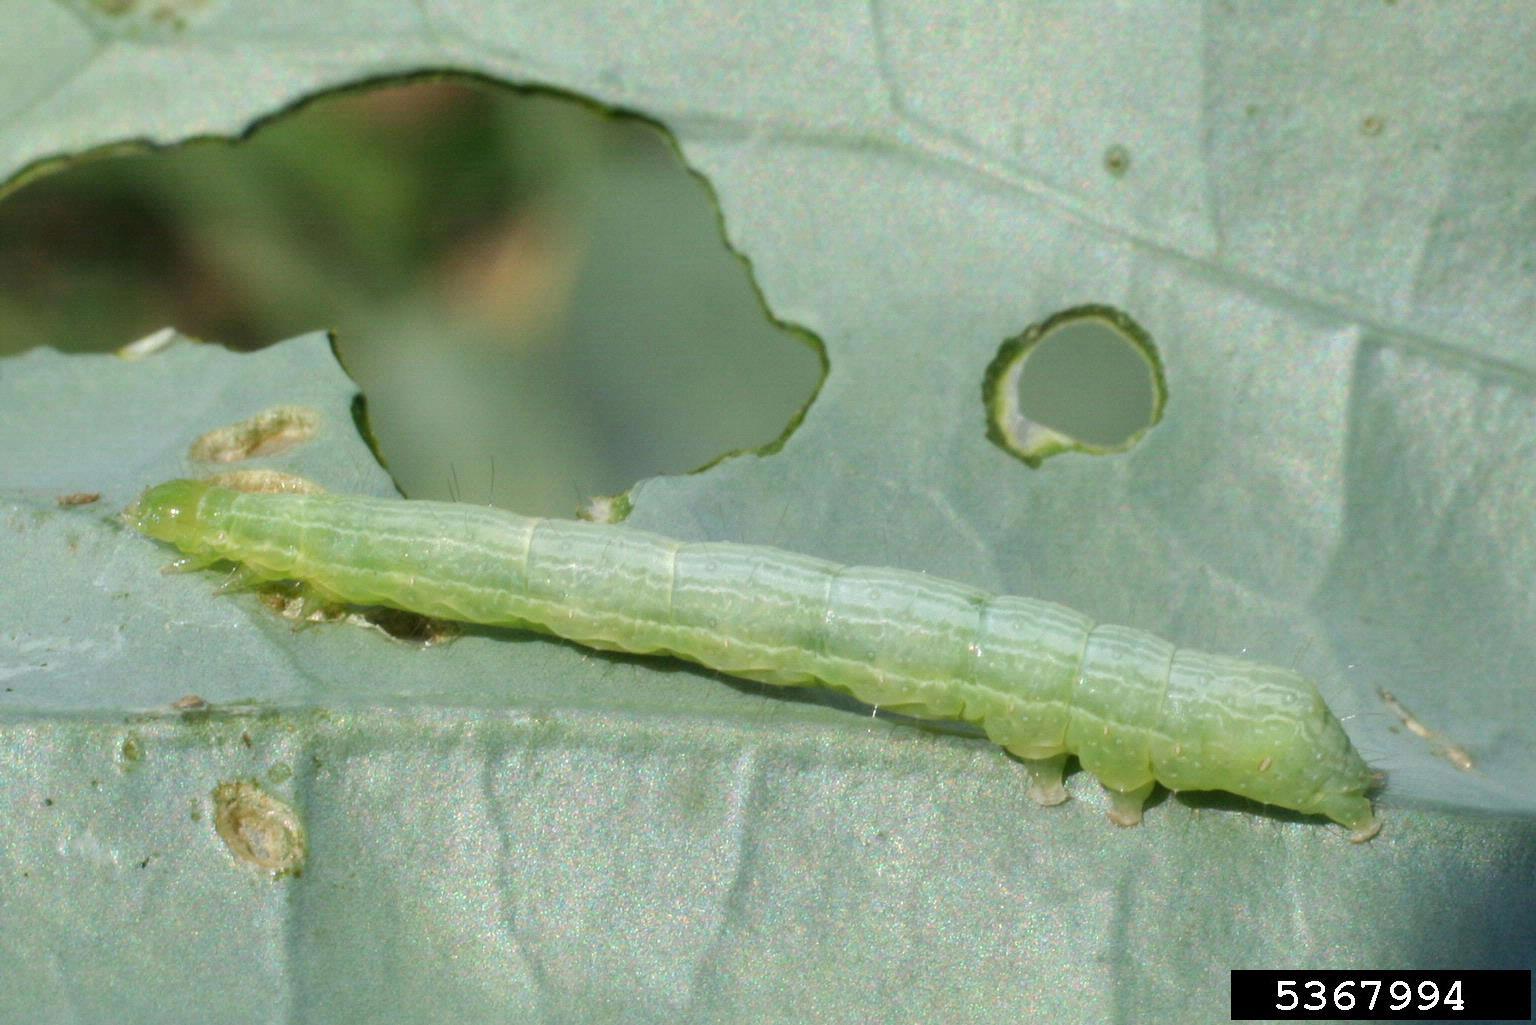 Mature cabbage looper larva. Early instars scrape leaf surfaces; later instars chew pprogressively larger holes. Credit: Russ Ottens, University of Georgia, Bugwood.org